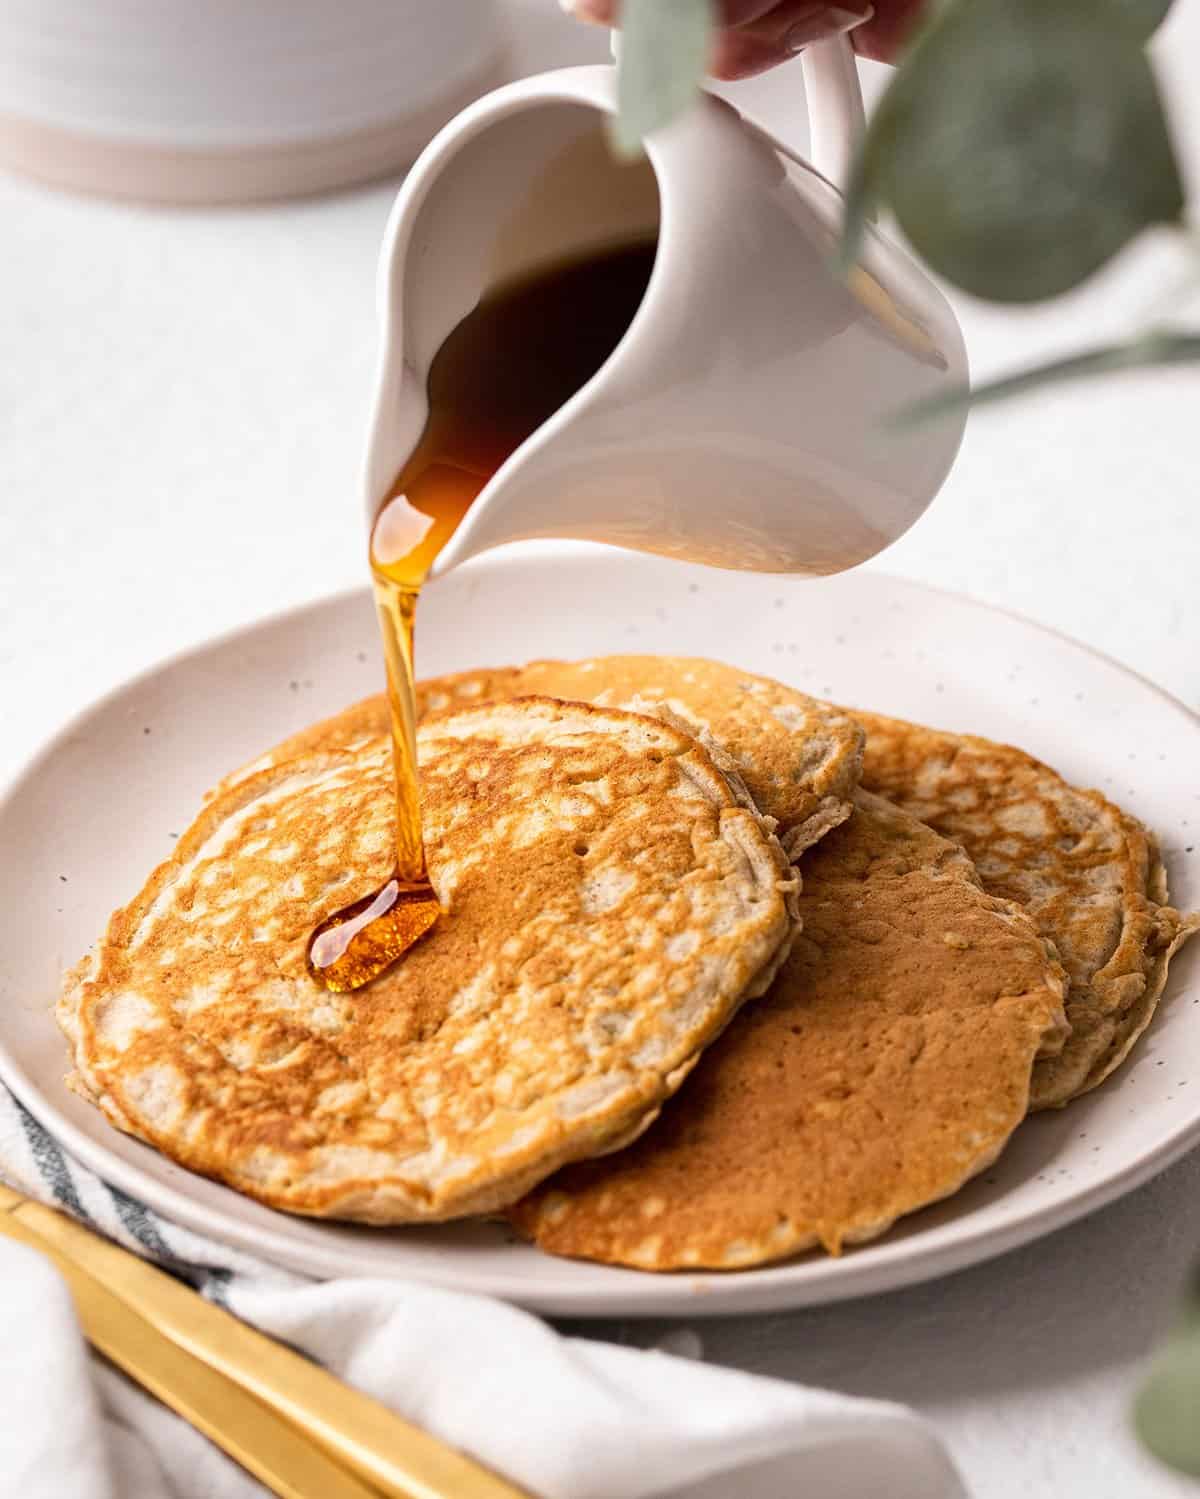 syrup being poured onto four Zucchini Pancakes on a plate